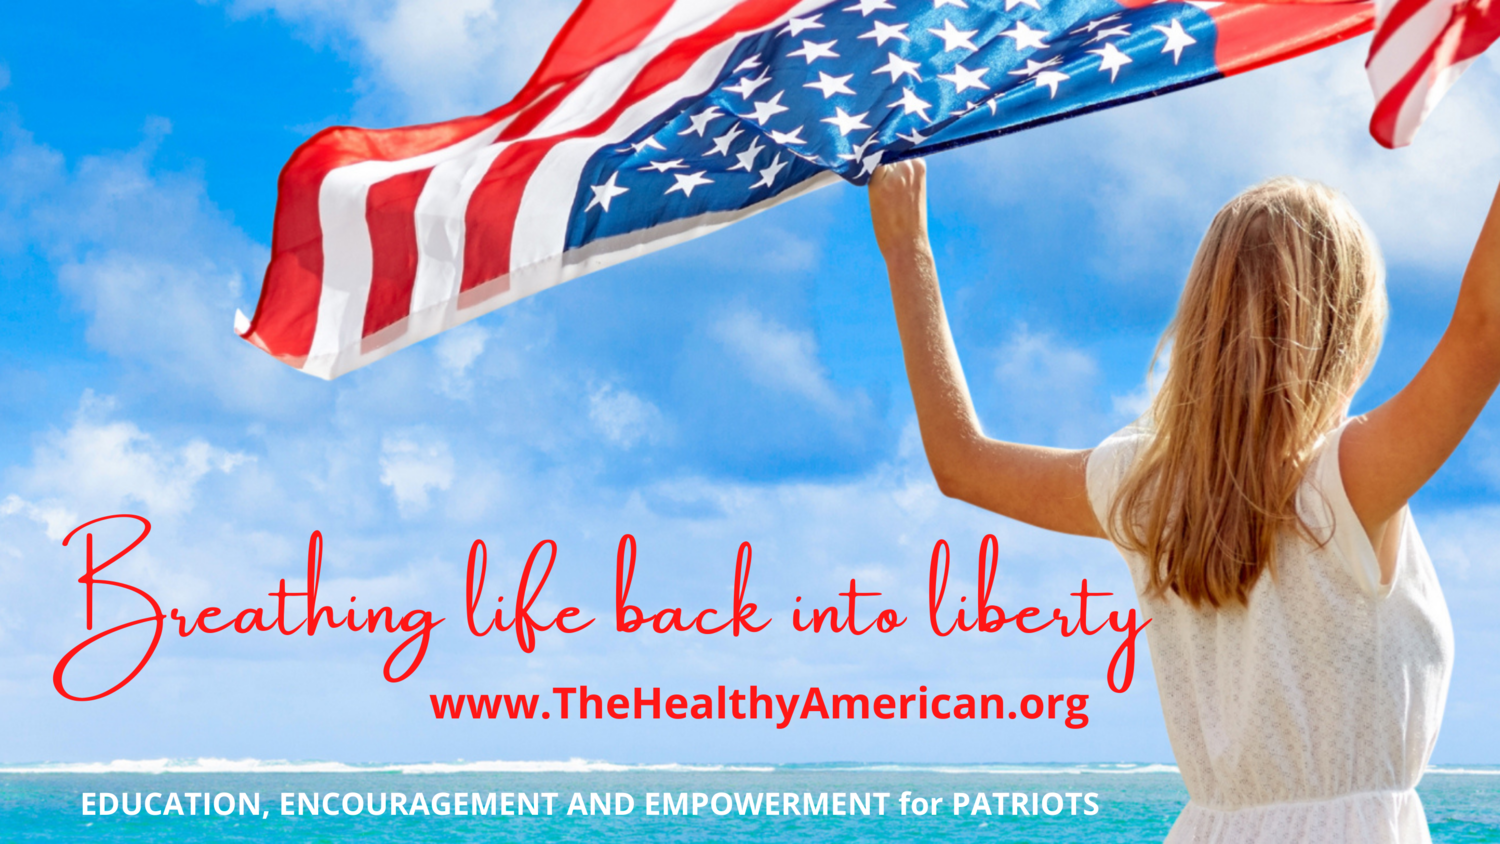 www.thehealthyamerican.org